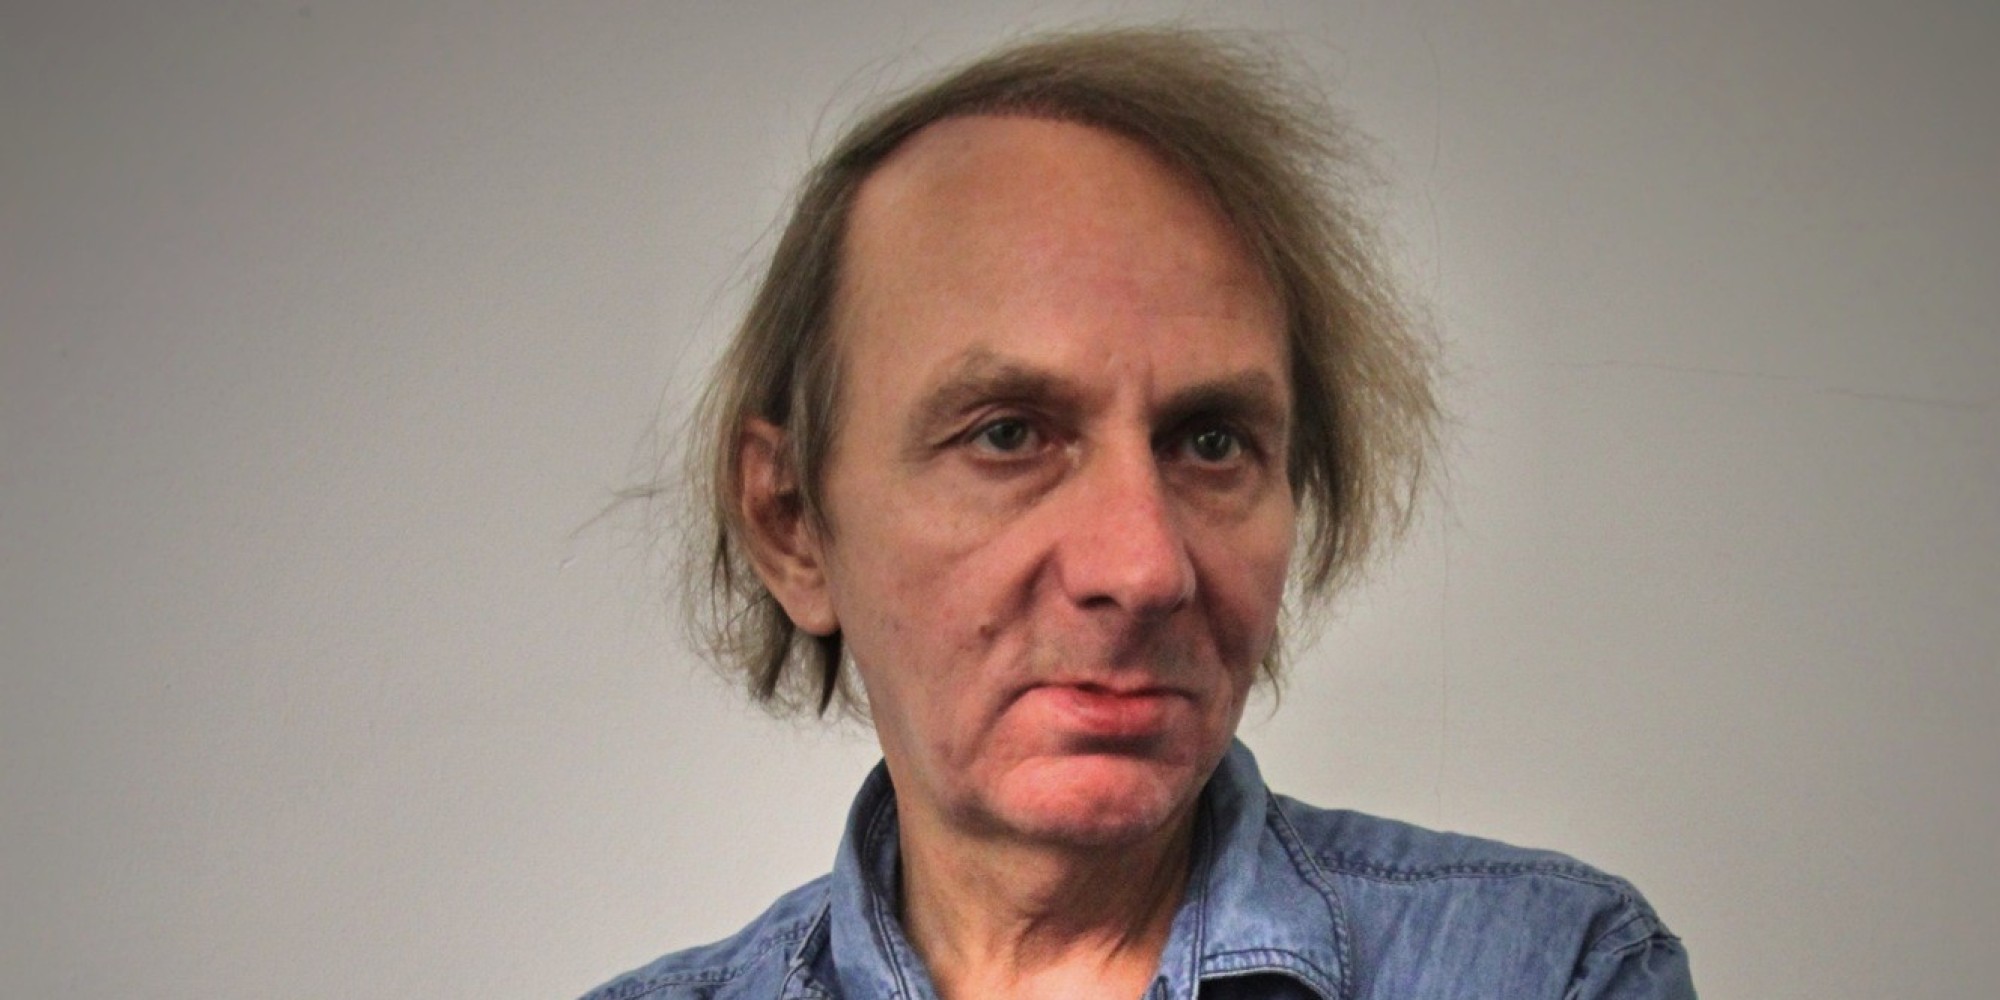 Houellebecq stirs passions with 'Islamic France' novel